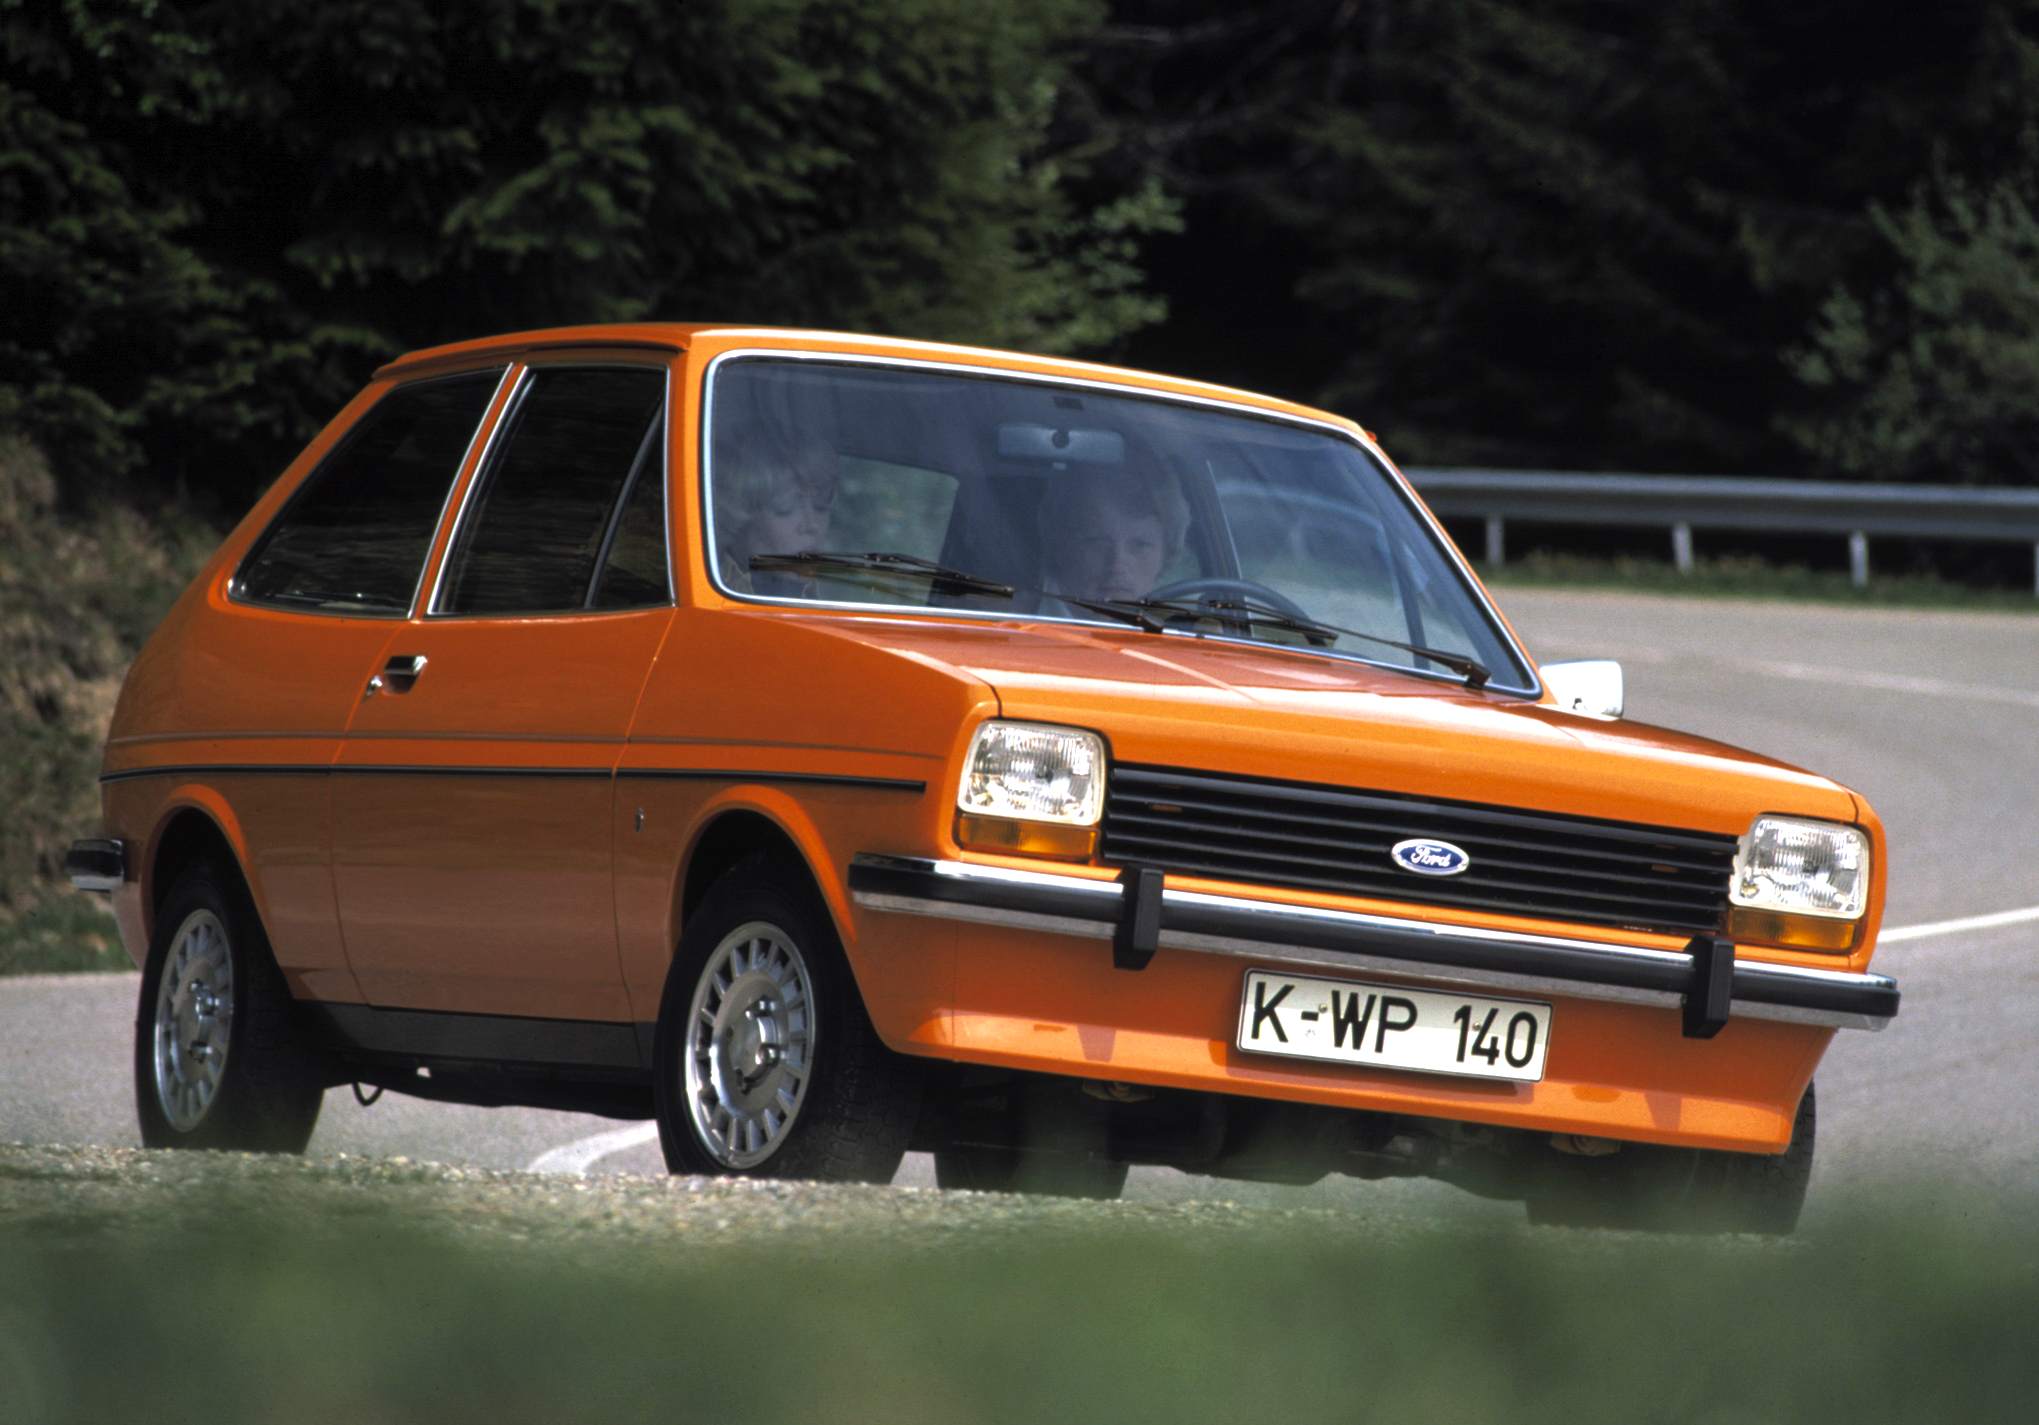 Ford Fiesta 1980: Review, Amazing Pictures and Images - Look at the car